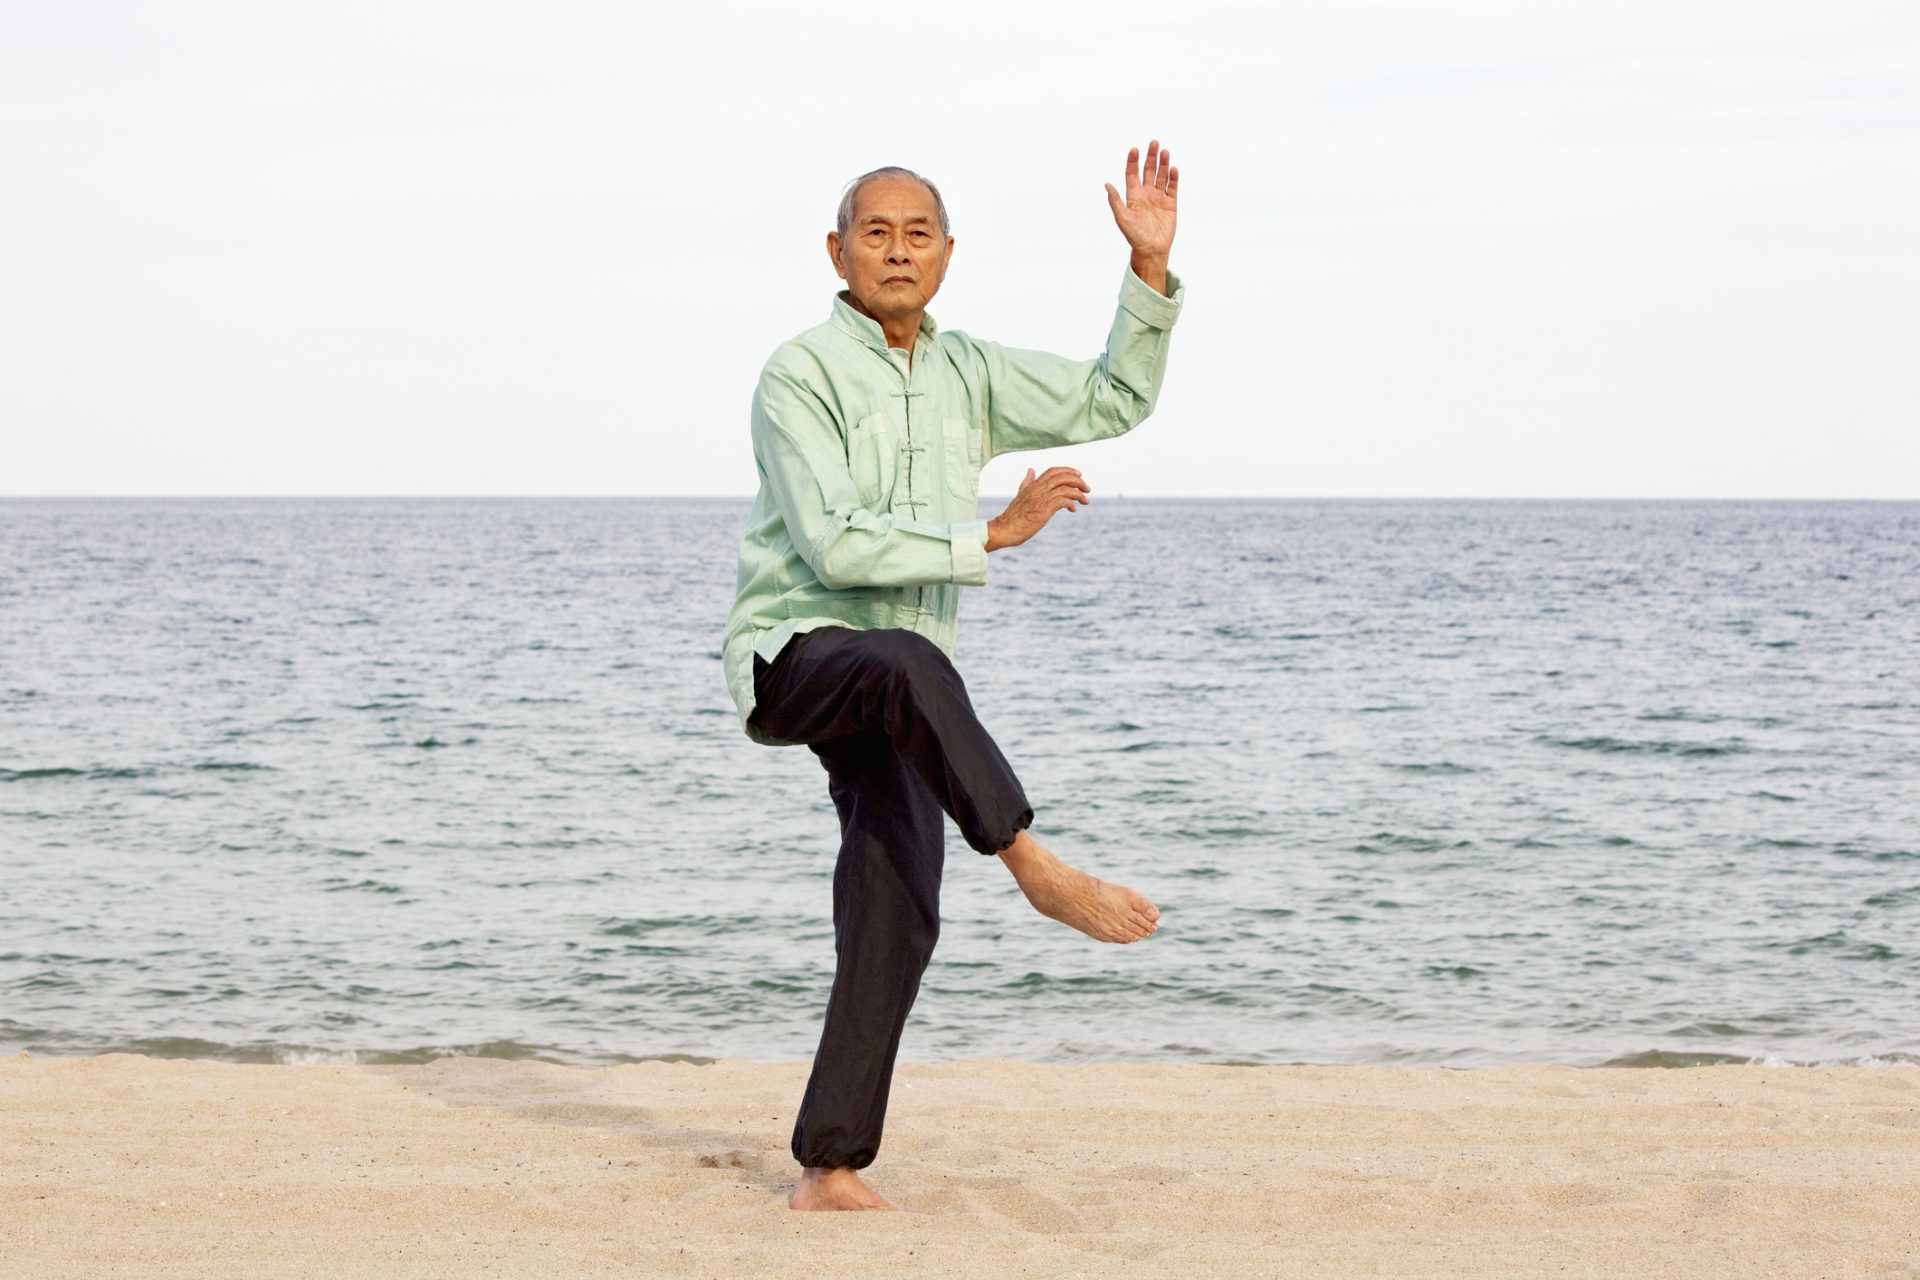 Tai Chi is better at lowering blood pressure than aerobic exercise study finds